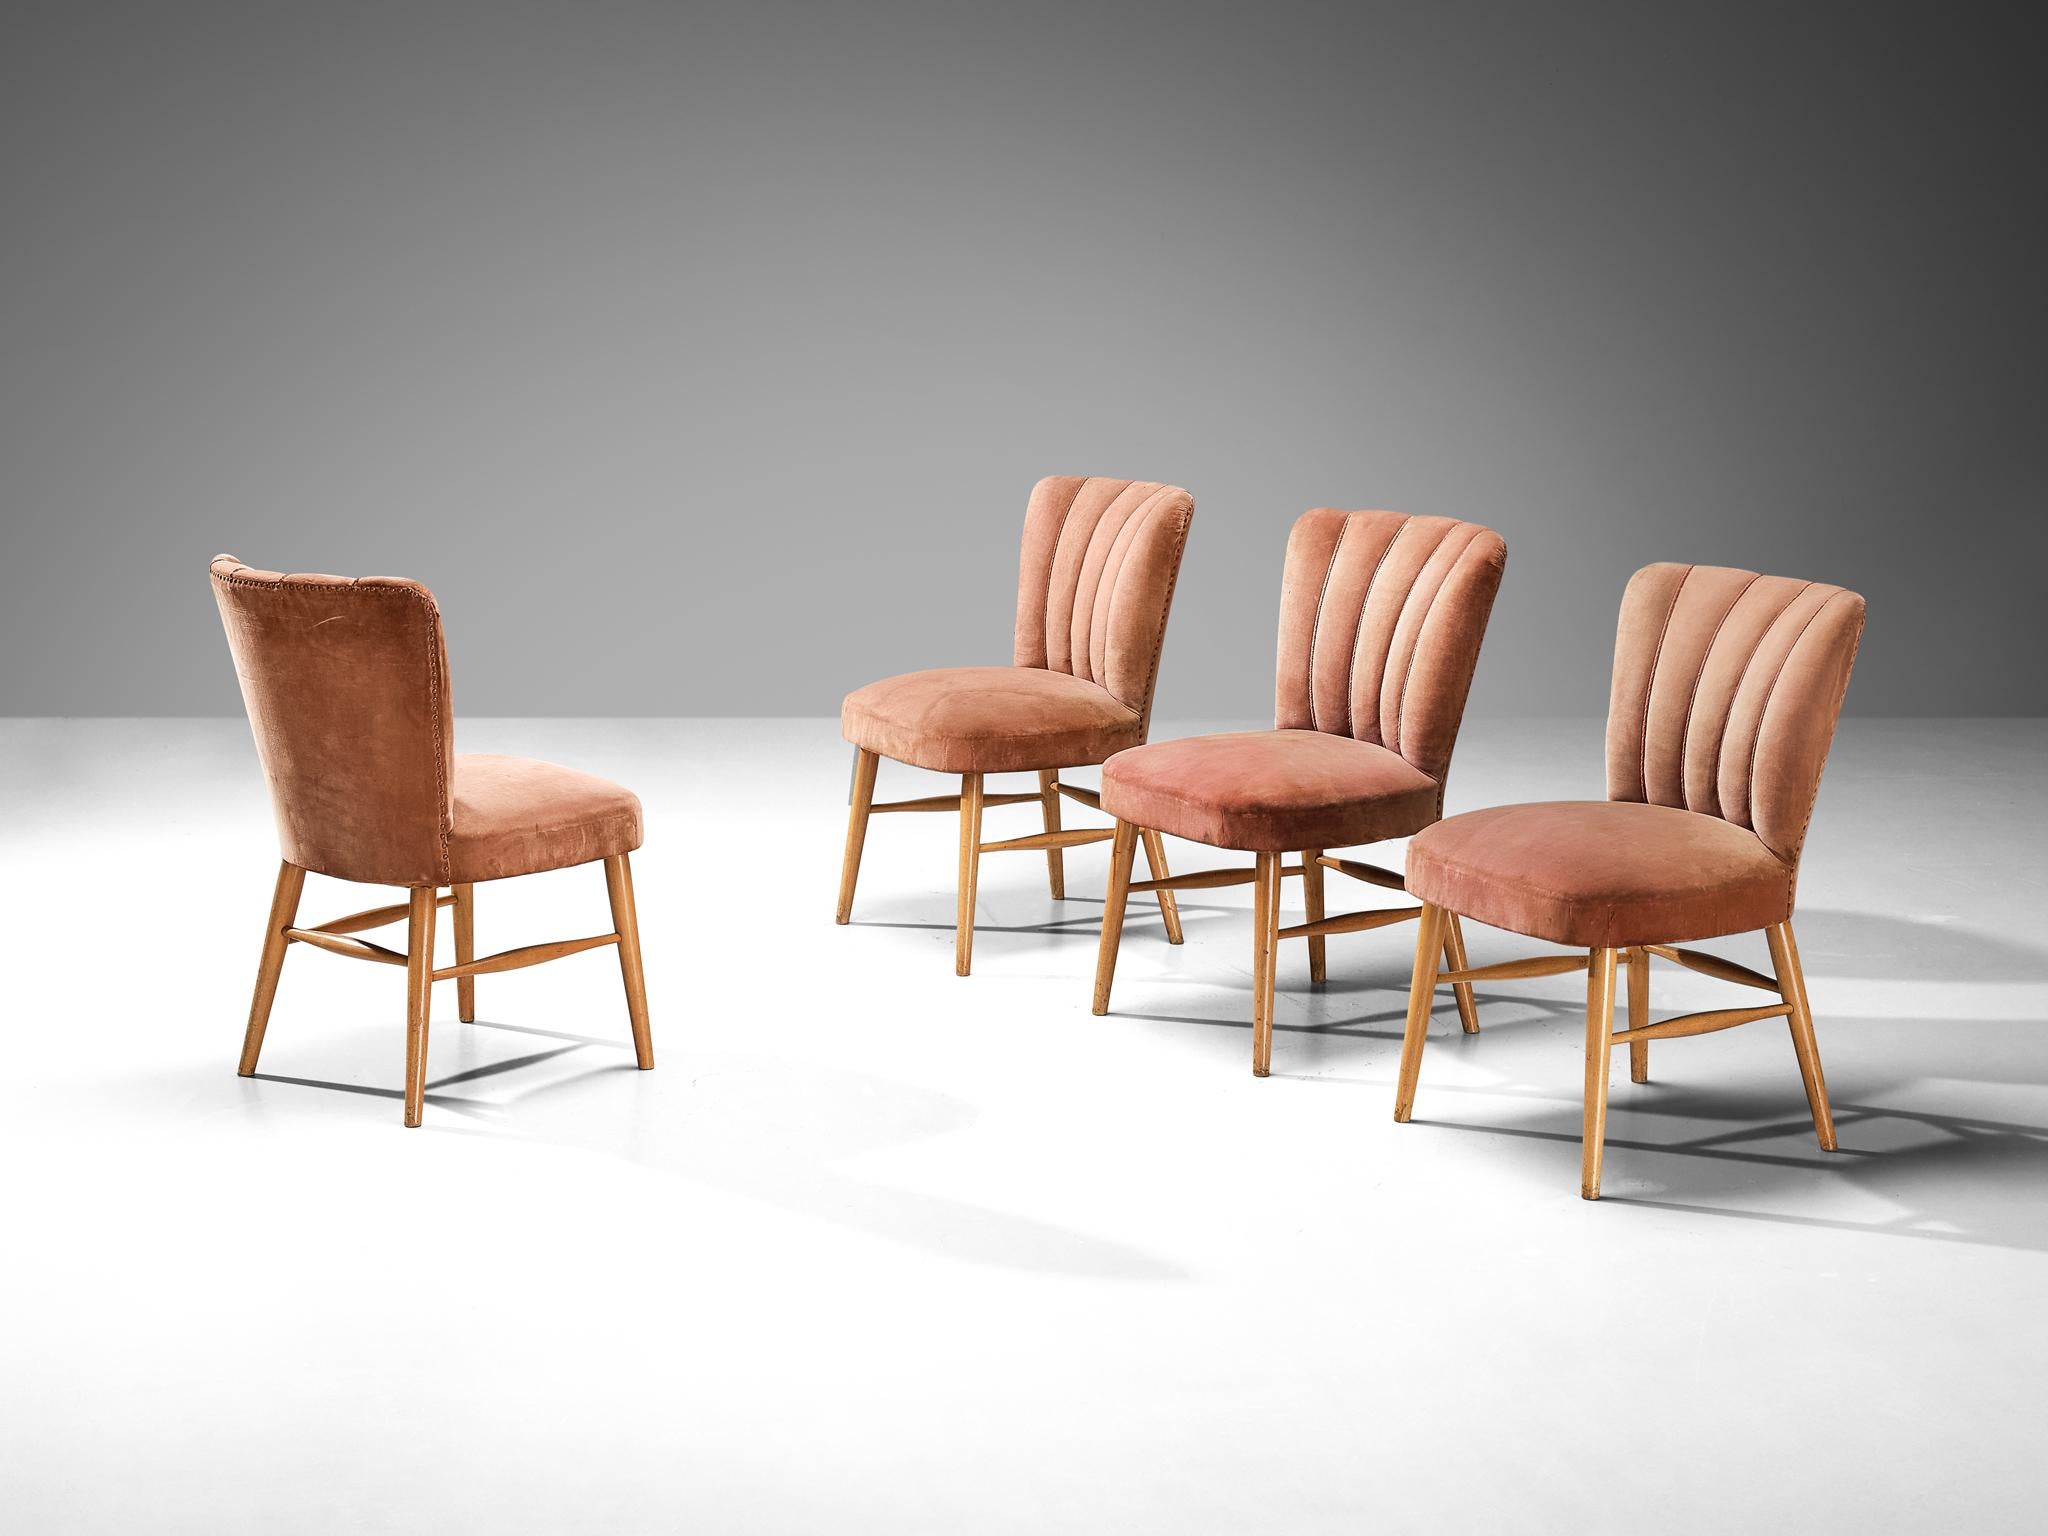 Dining chairs, velvet, beech, metal, Europe, 1950s

Elegant dining chairs in a soft pink velvet upholstery. A beech frame with armrests holds the seat and backrest that is highlighted with vertical lines ending in soft curves on top. The tufted